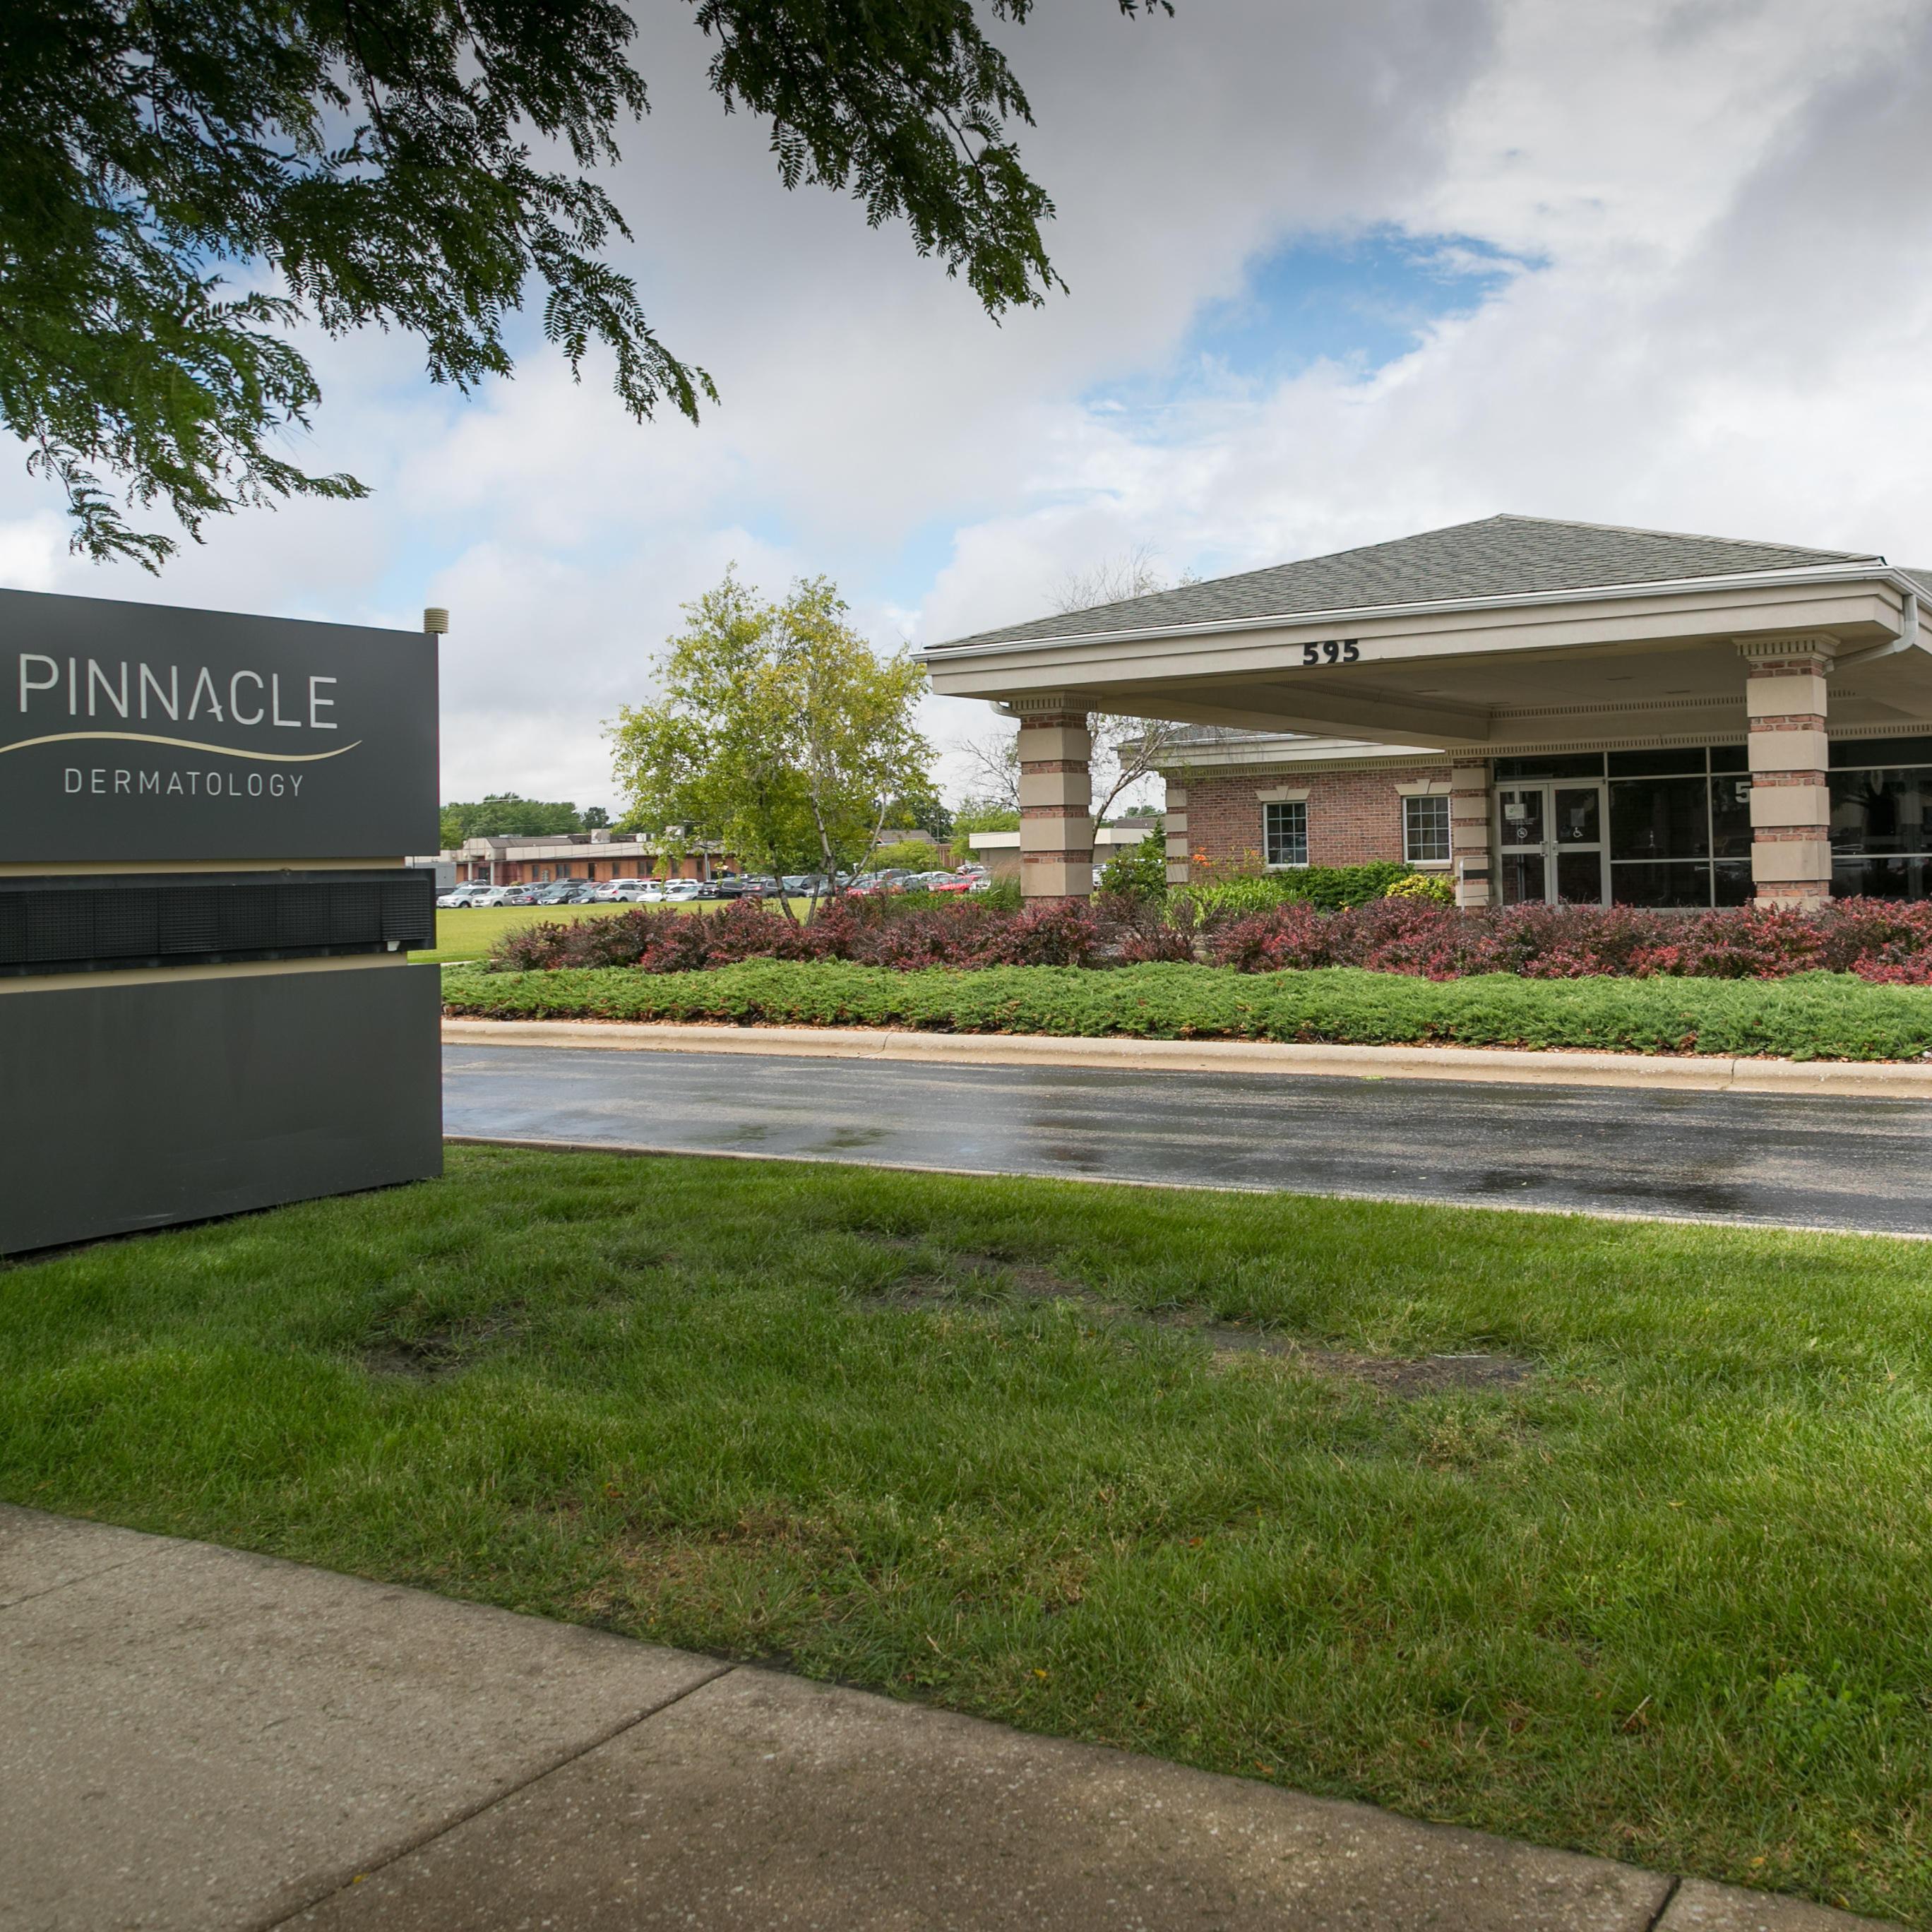 Pinnacle Dermatology Bourbonnais, IL offers medical and surgical skincare. Same-day appointments may be available for acne, eczema, rosacea, skin cancer & more.